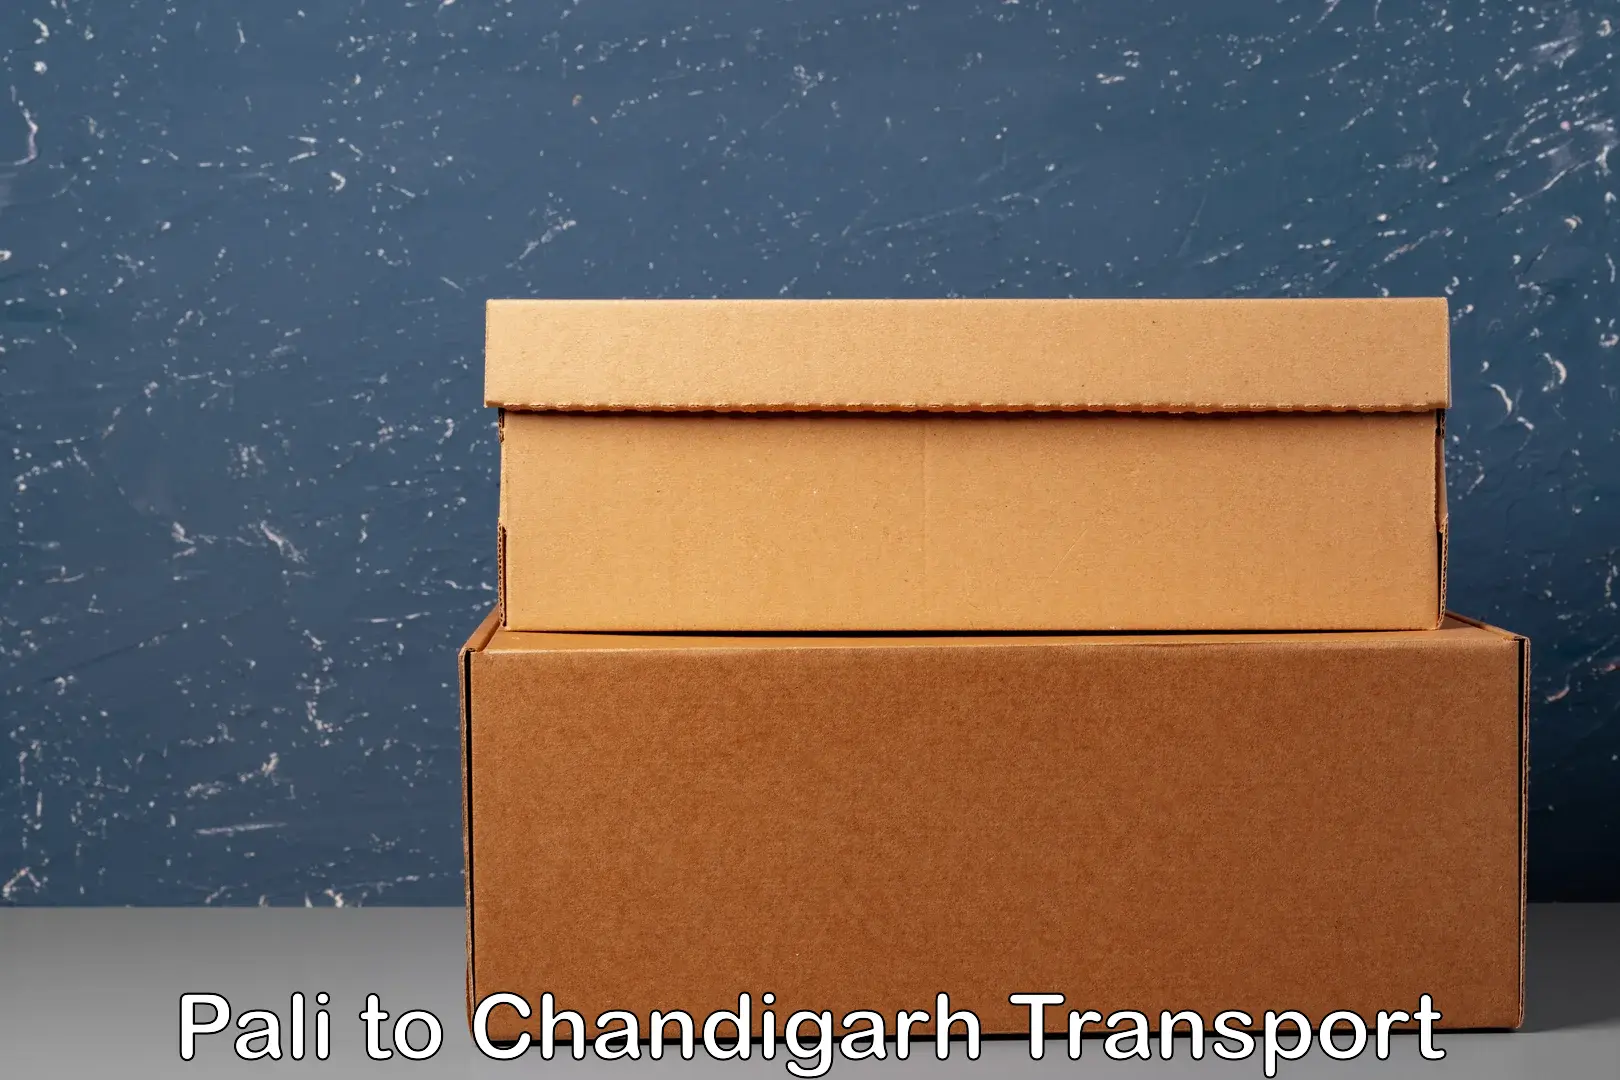 Two wheeler parcel service Pali to Chandigarh